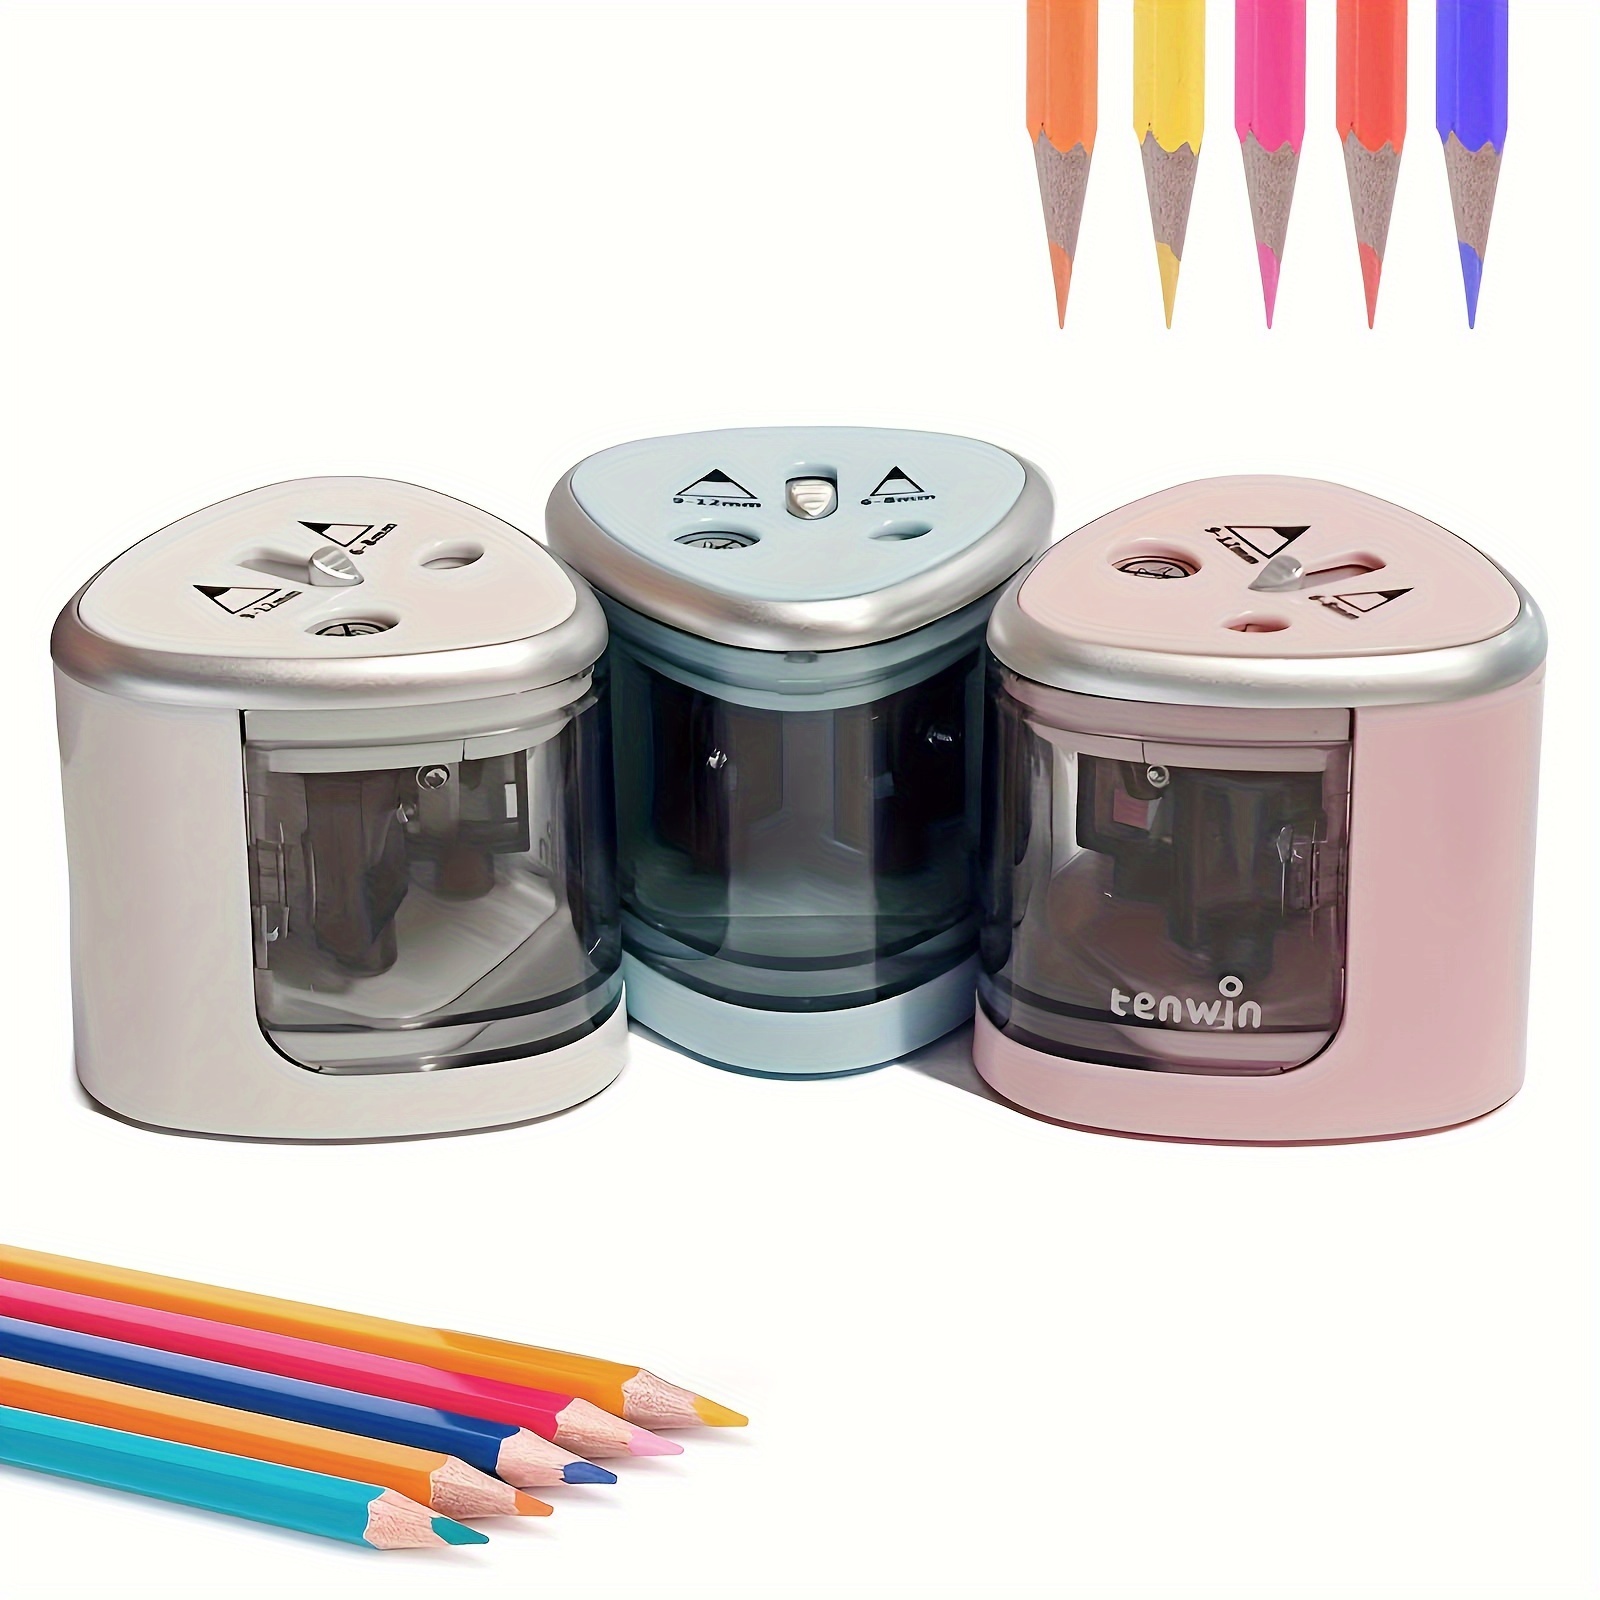 Electric Pencil Sharpener,, Electric Pencil Sharpener Plug In For 6-12mm  /colored Pencils/office Pencil Sharpener For Colored Pencils, Auto Stop,  Supe